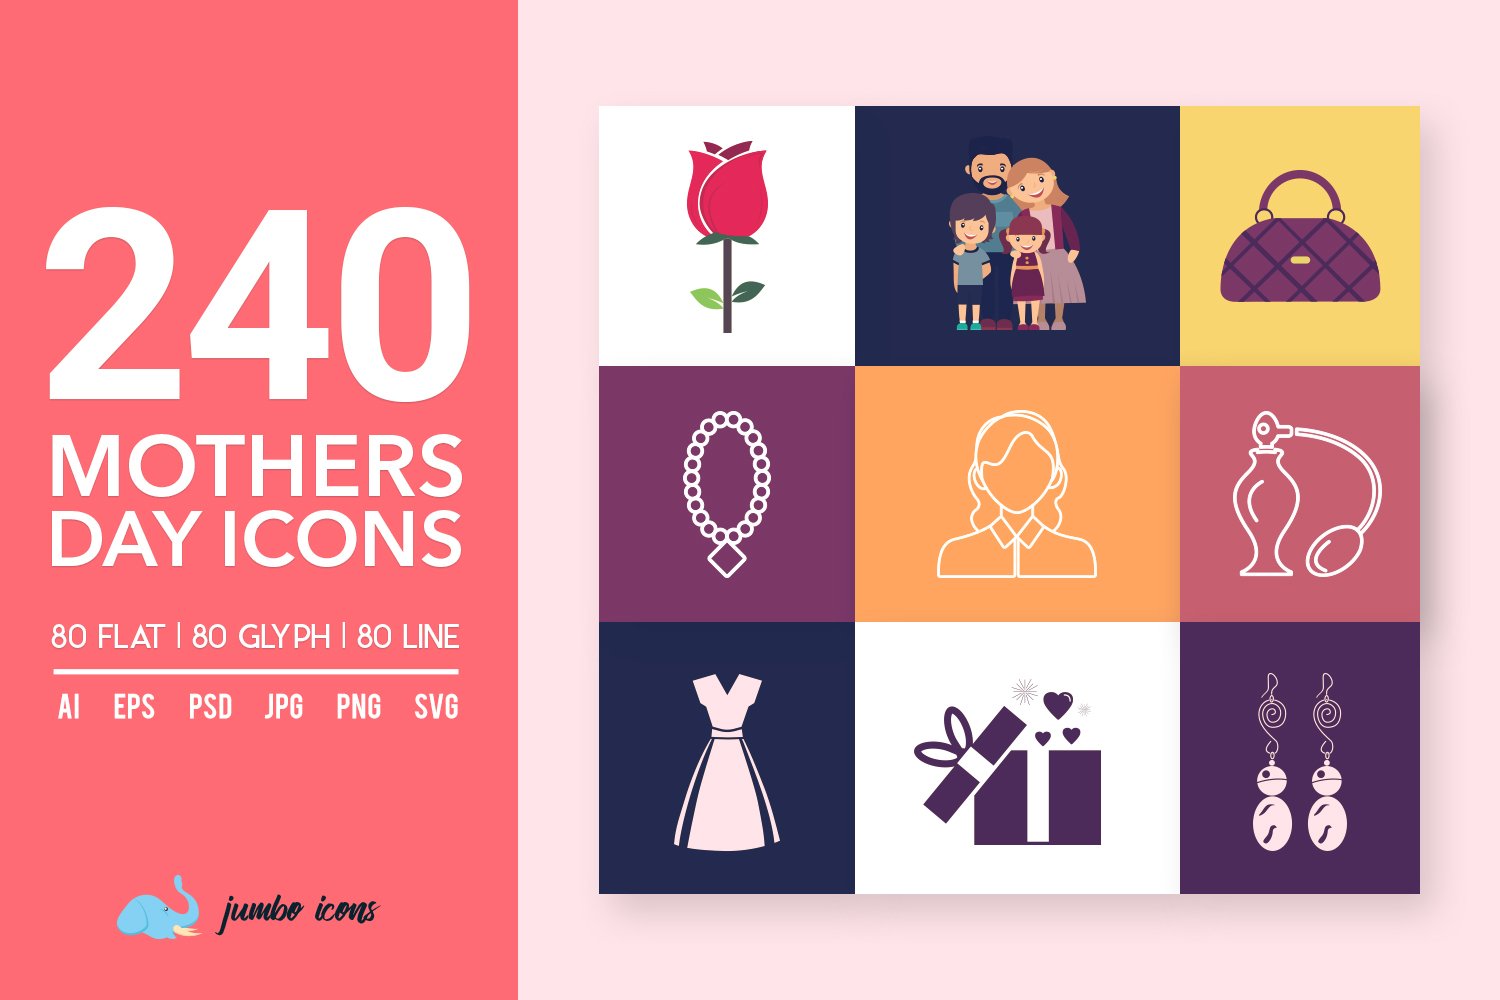 Mothers' Day Vector Icons cover image.